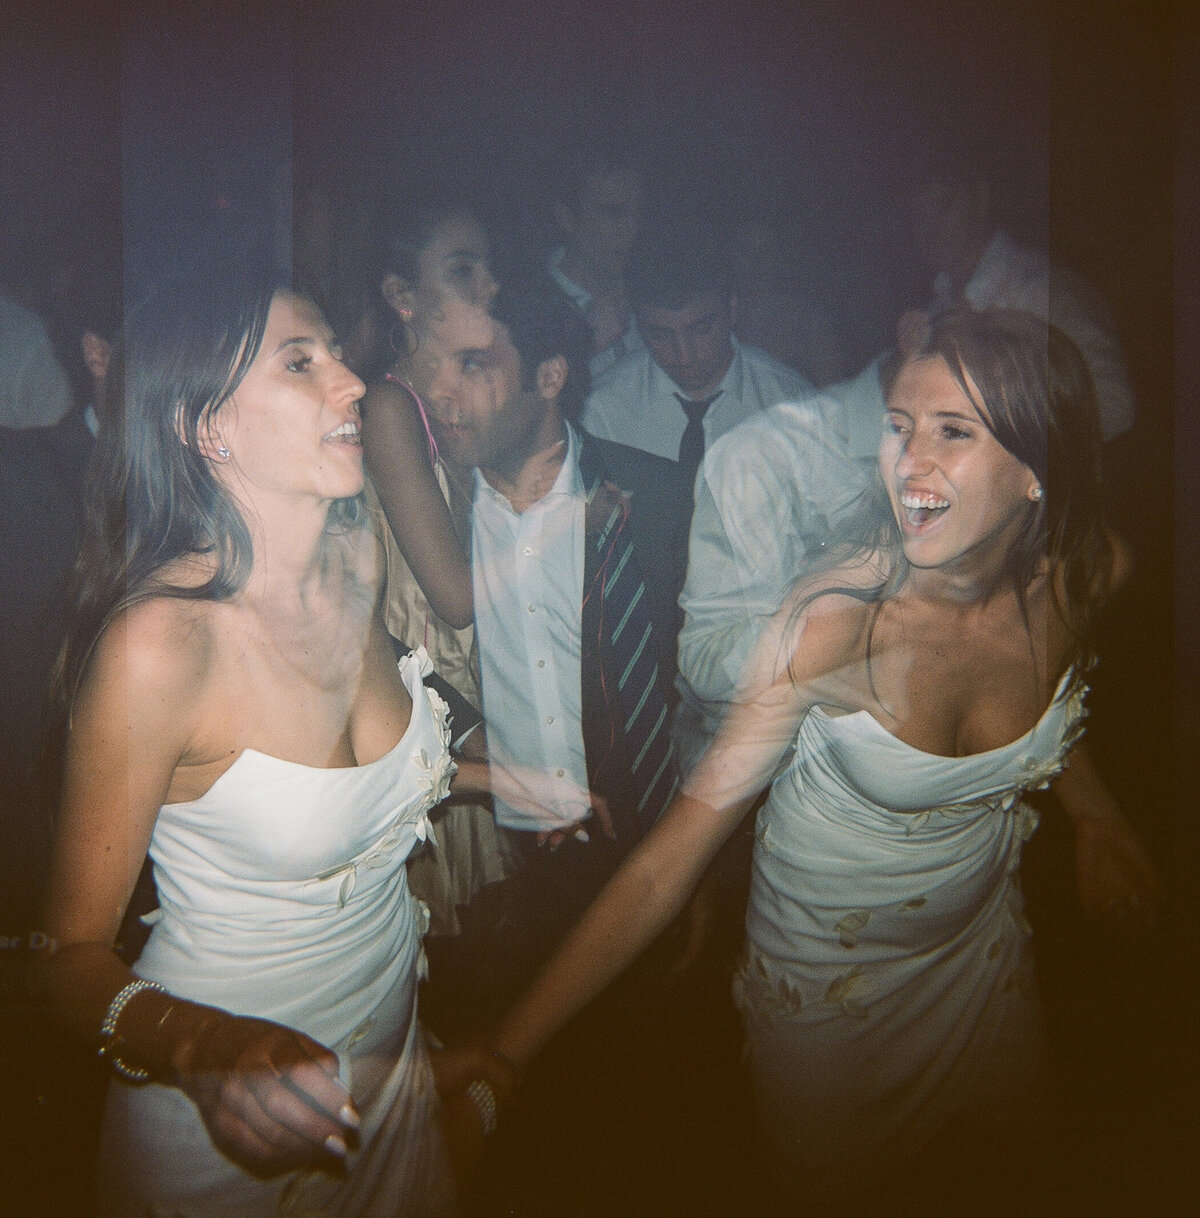 Sarah + George - After Party at Santos Bar - Wedding Weekend - Luxury Event Planner Michelle Norwood Events - 3